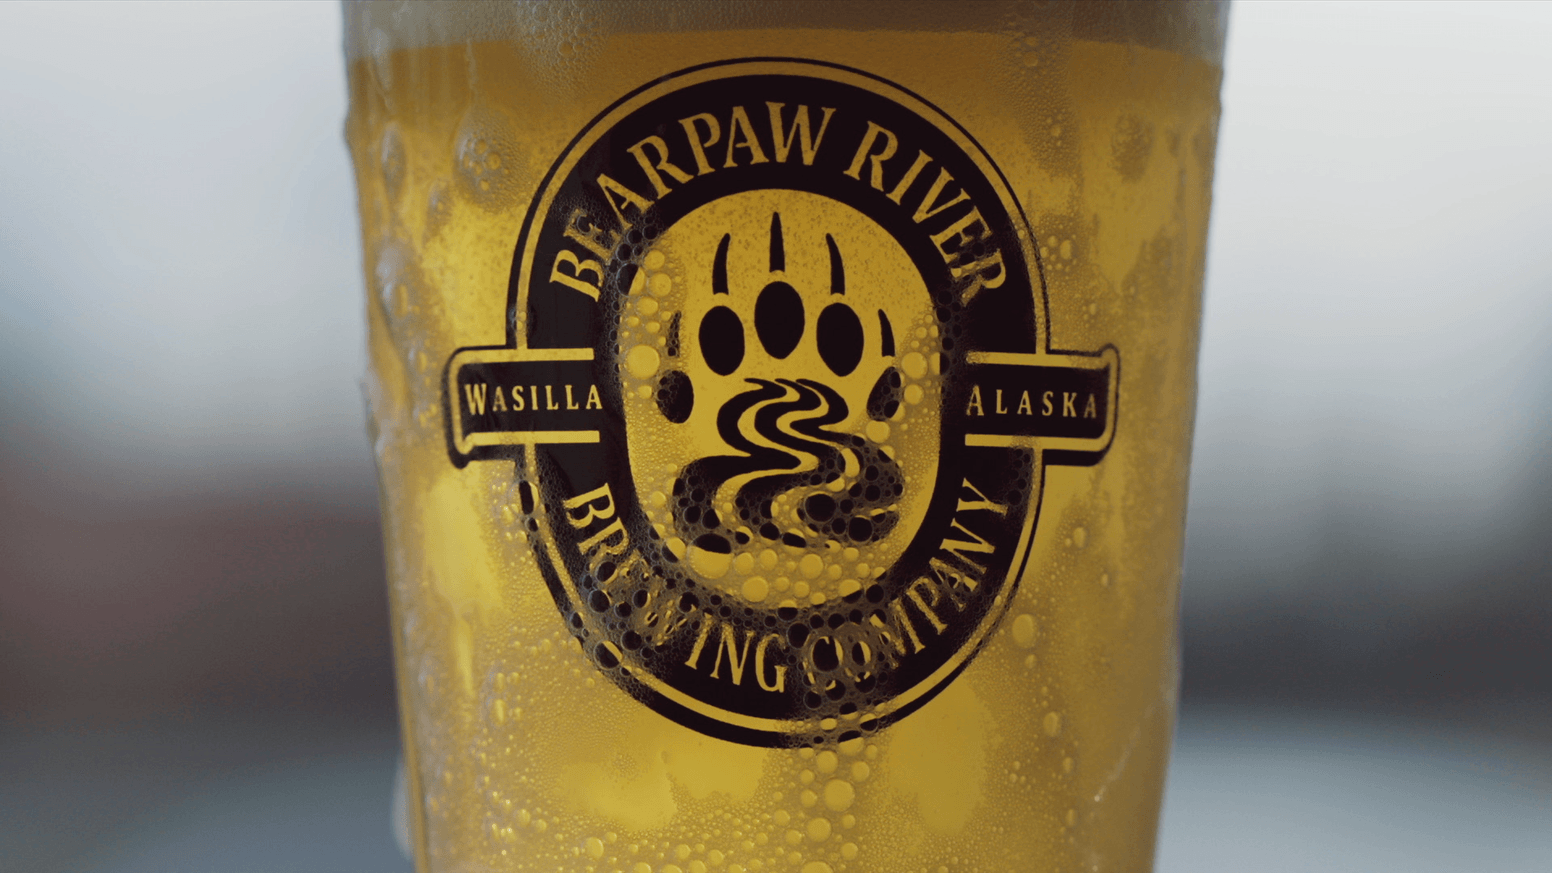 Bear Paw Company Logo - Bearpaw River Brewing Company - Building A Community Taproom by ...